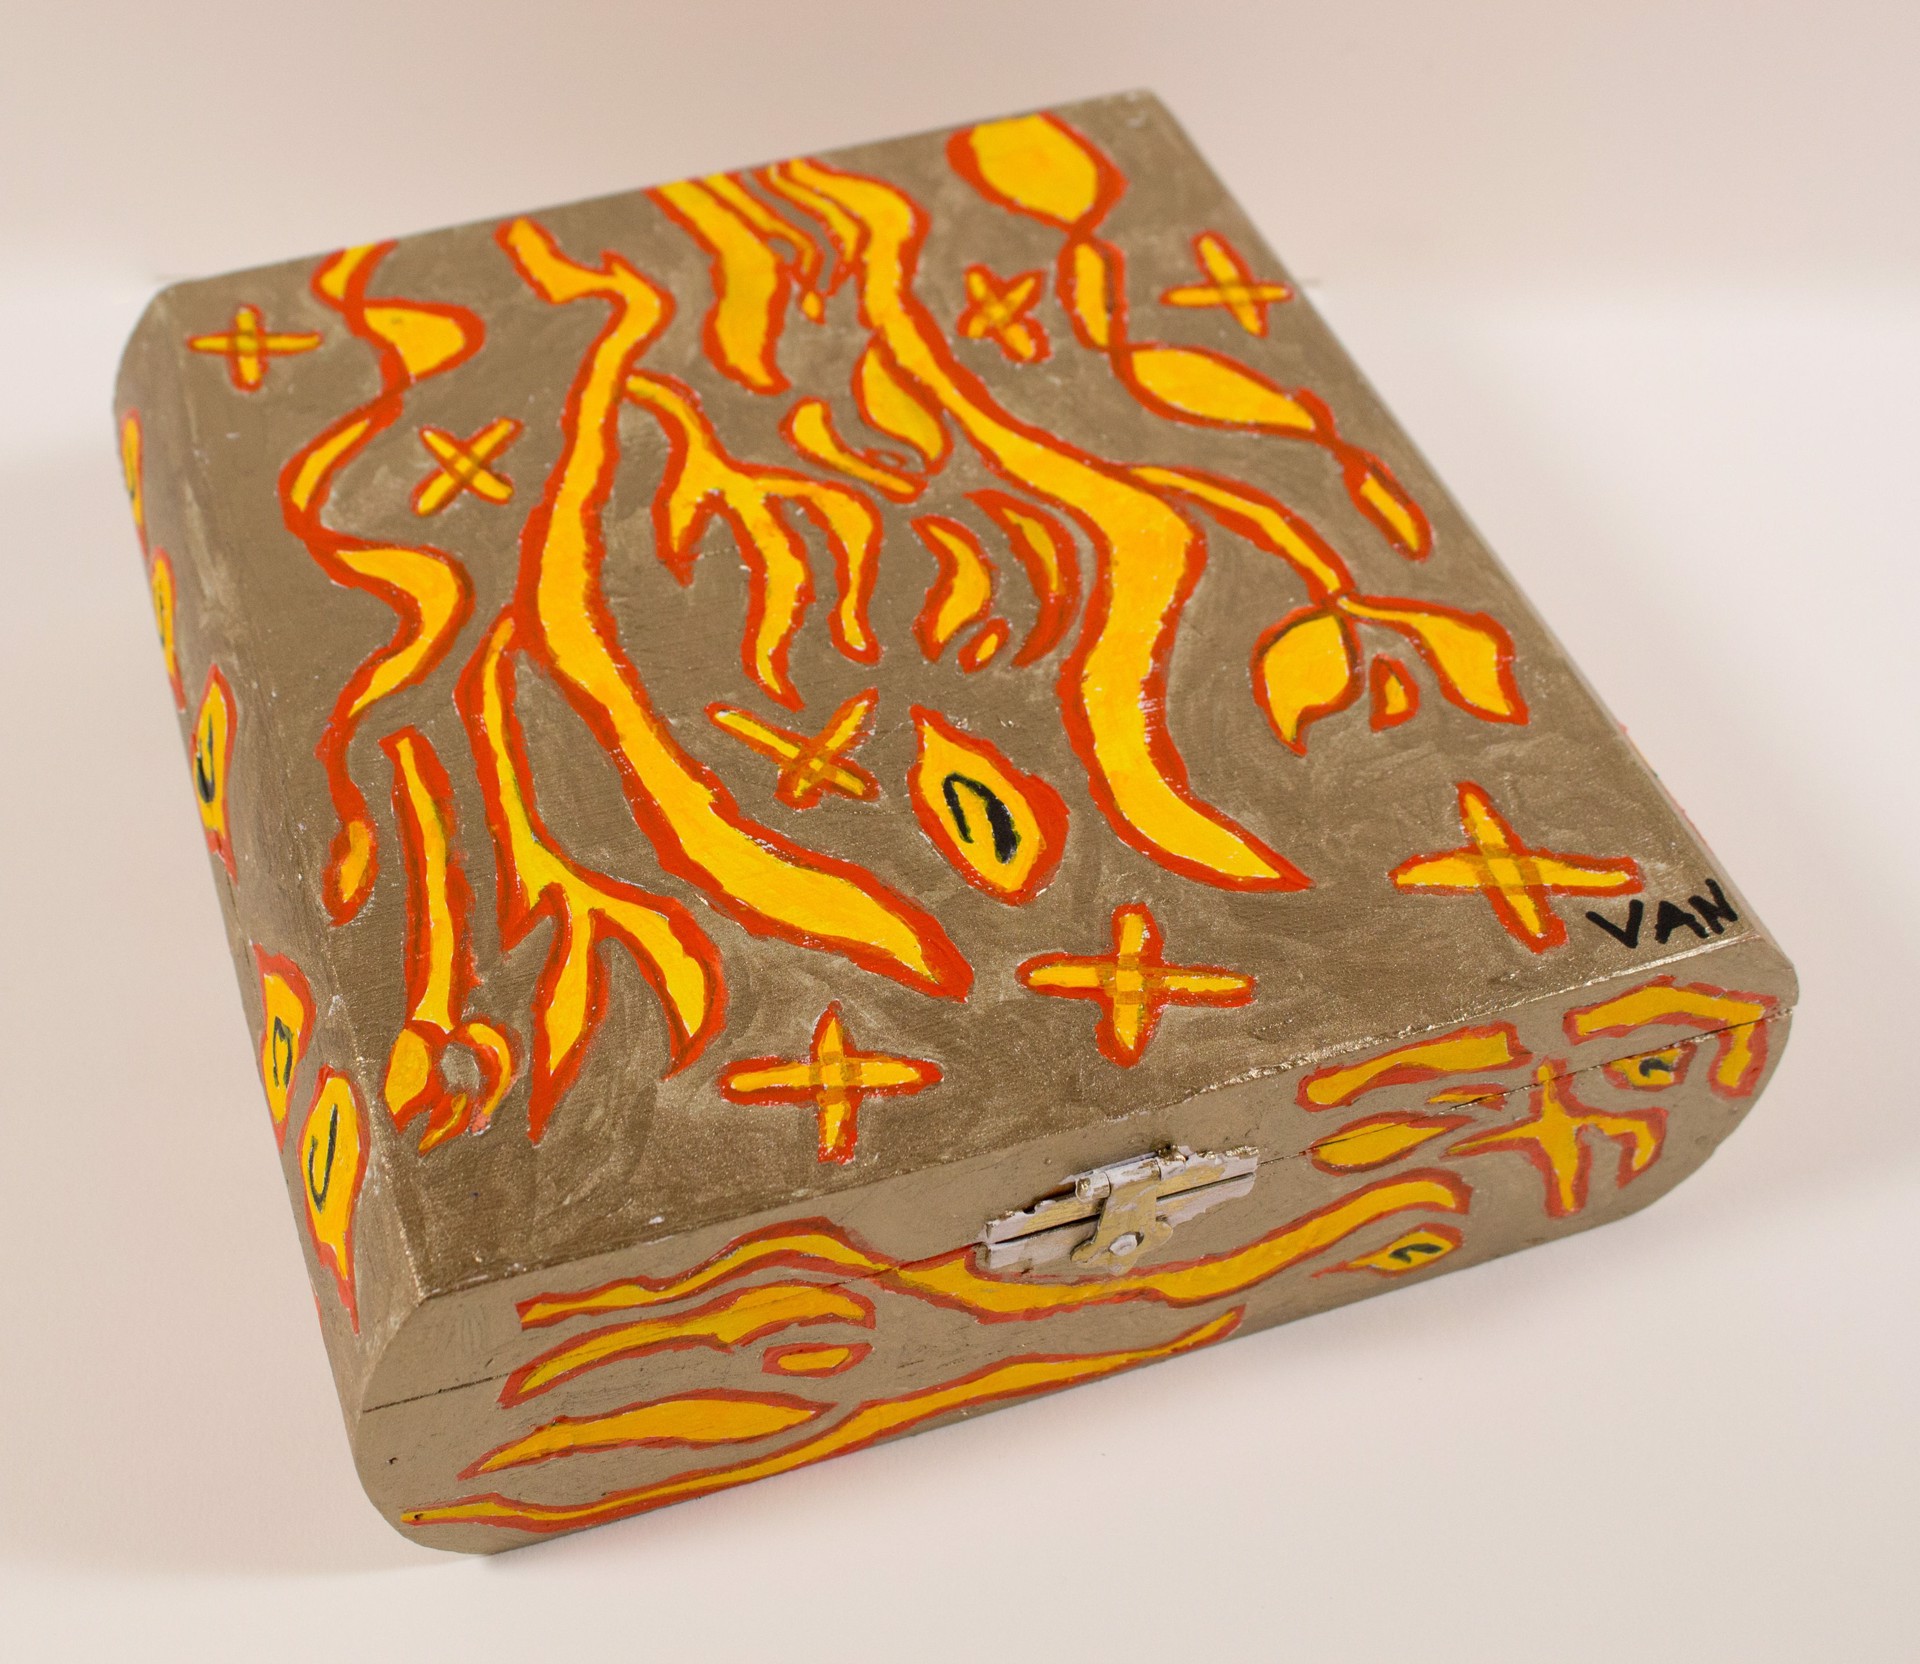 The Fire of Flames (cigar box) by Vanessa Monroe